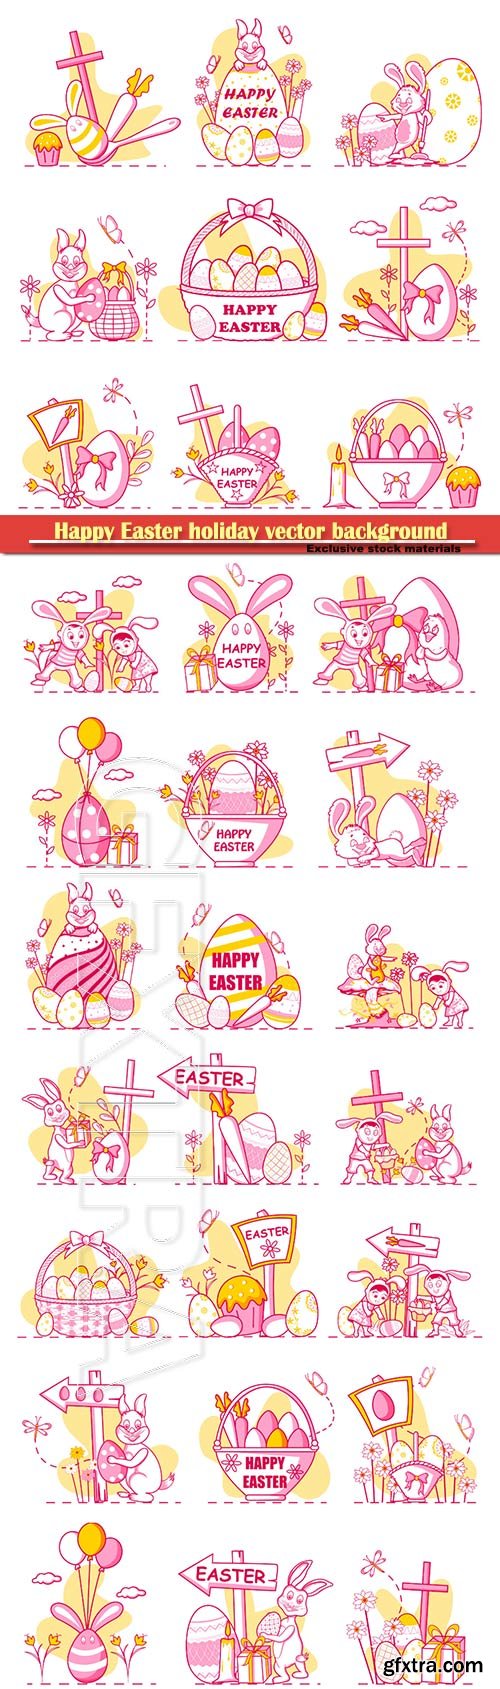 Happy Easter holiday celebration background in vector